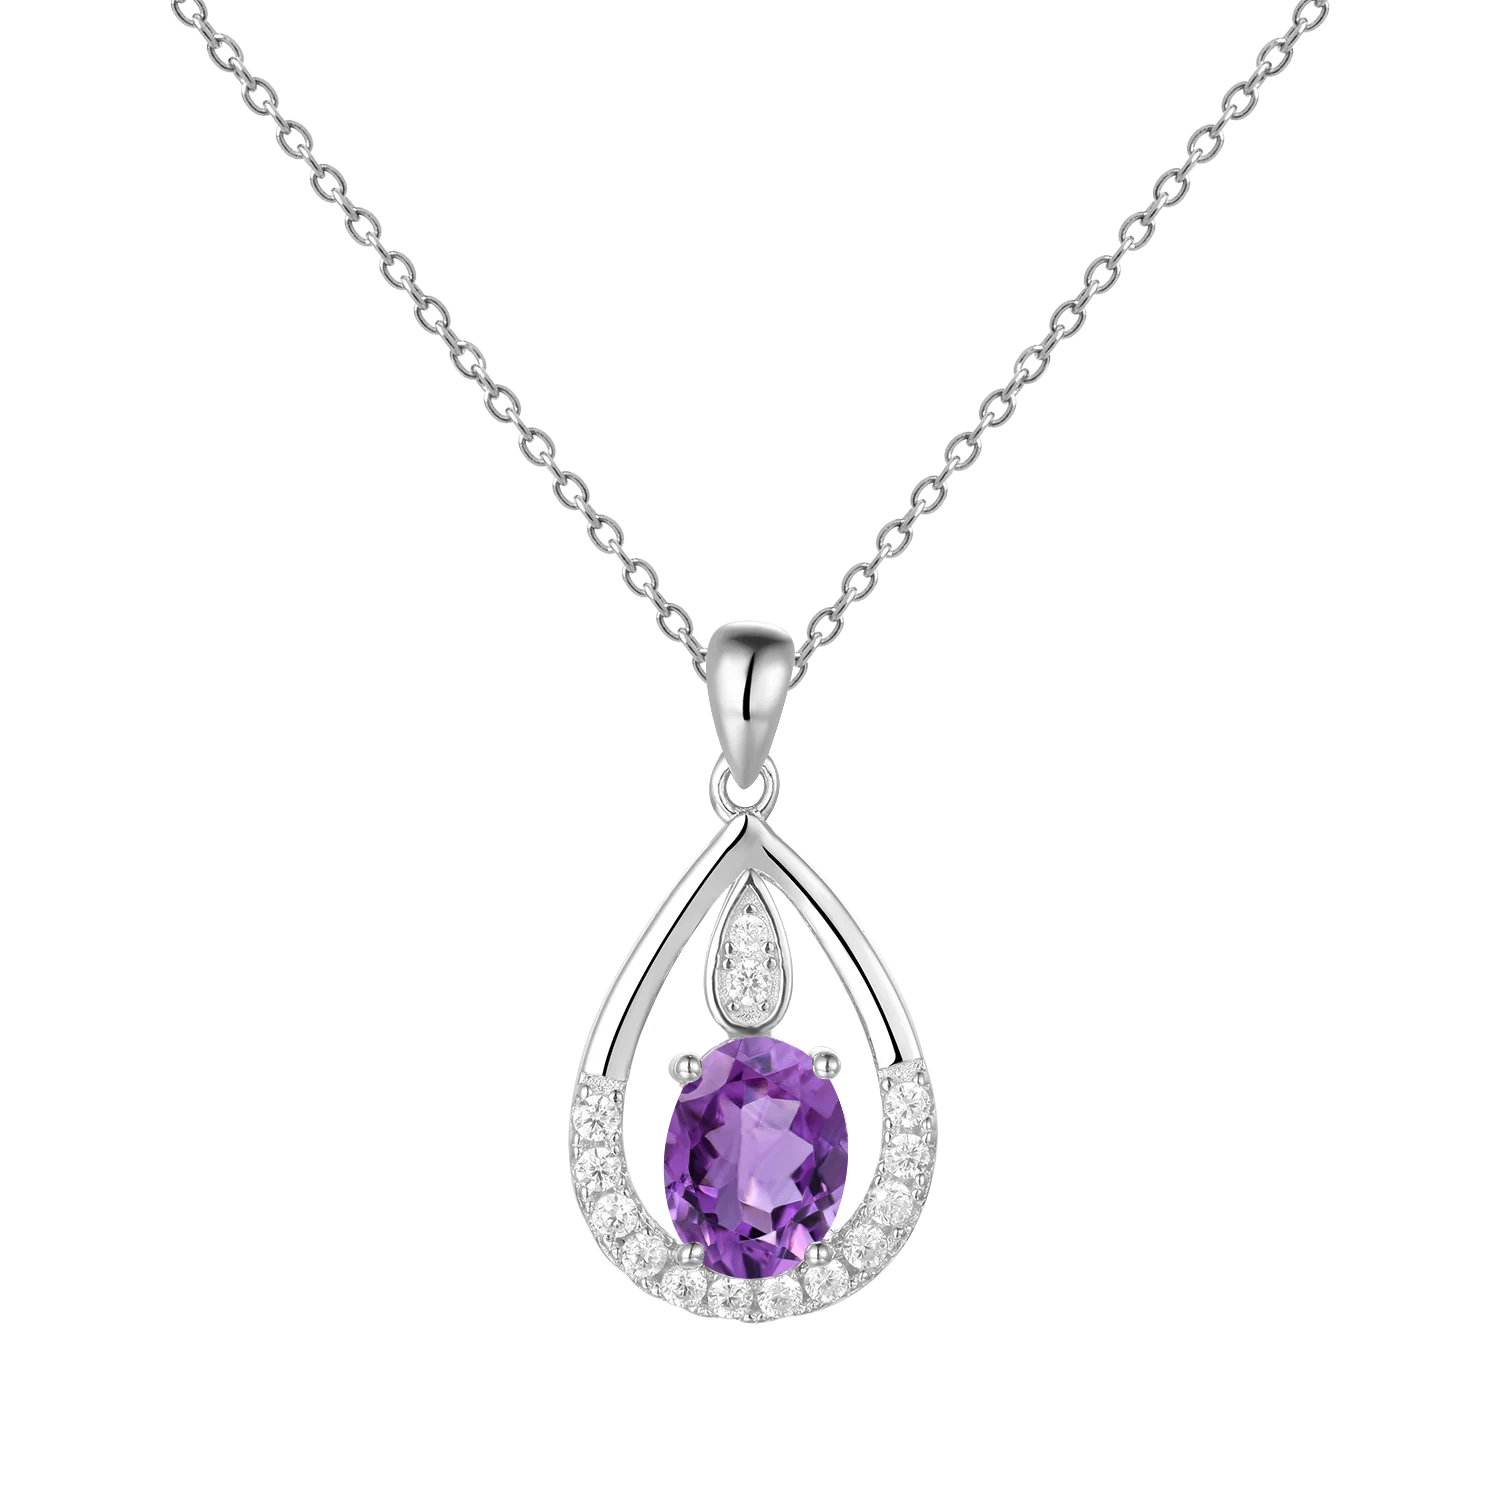 Gem's Ballet December Birthstone Topaz Necklace 6x8mm Oval Pink Topaz Pendant Necklace in 925 Sterling Silver with 18" Chain Amethyst